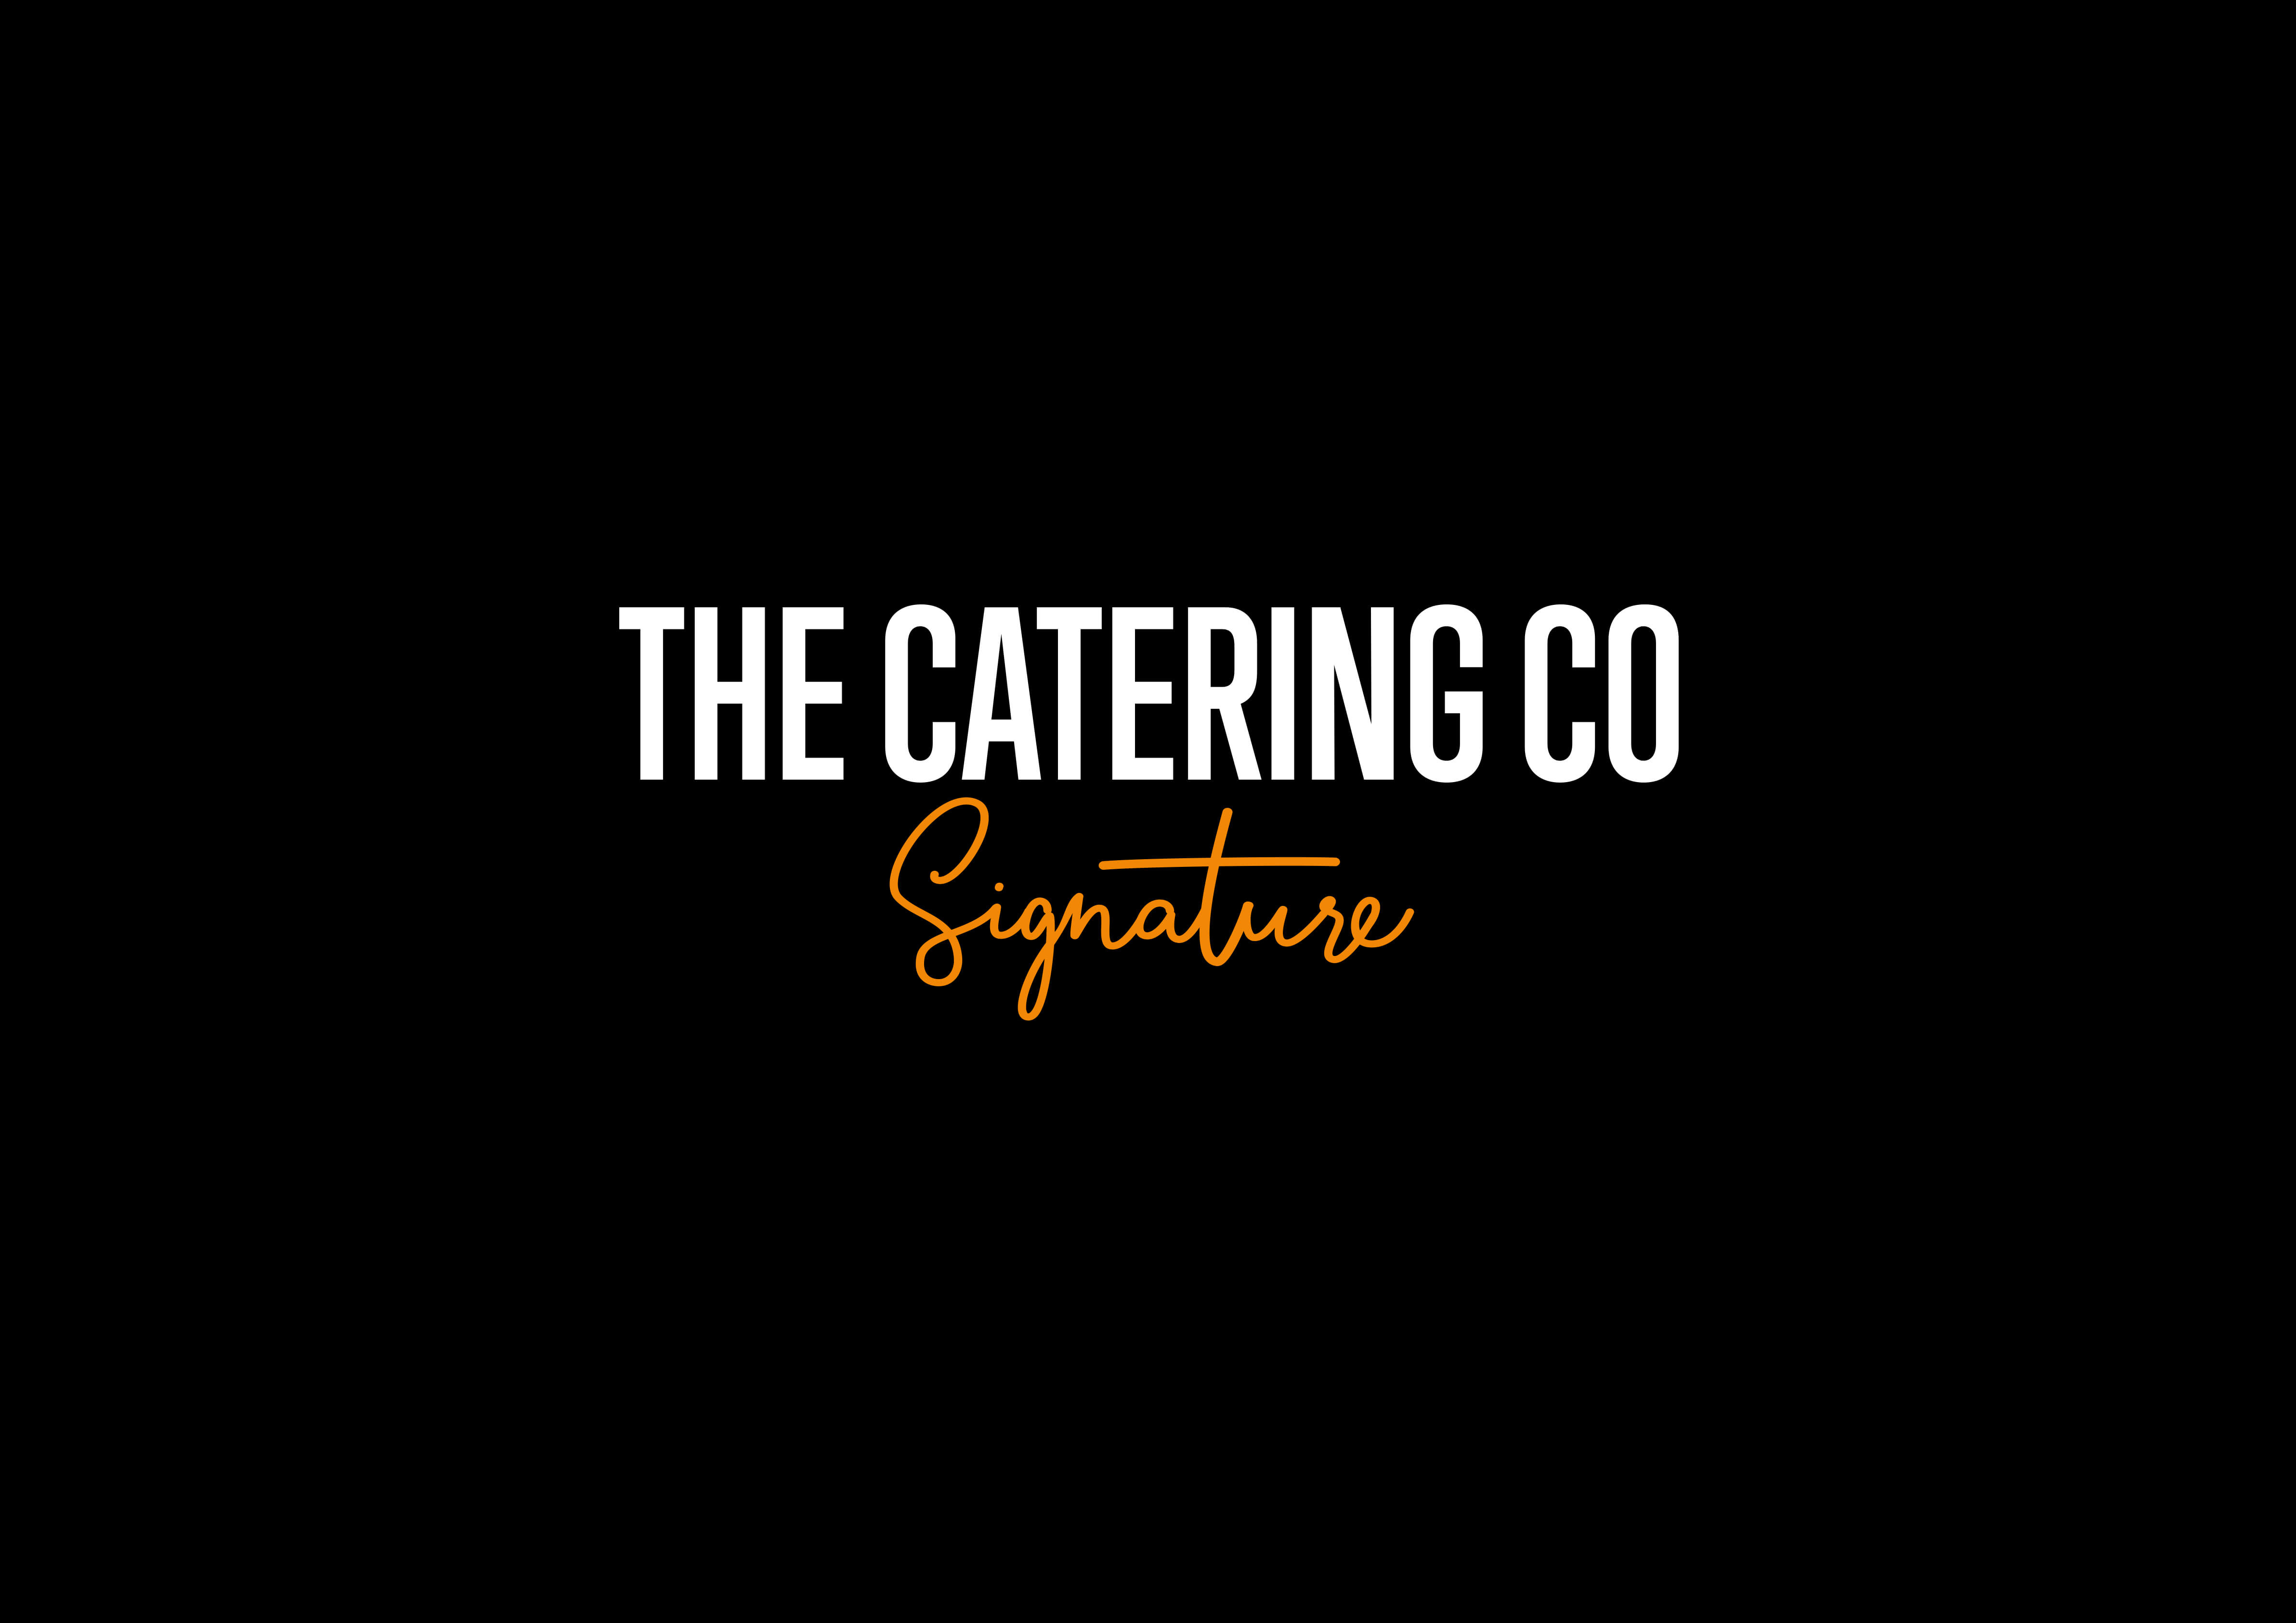 Packaging for The Catering Co